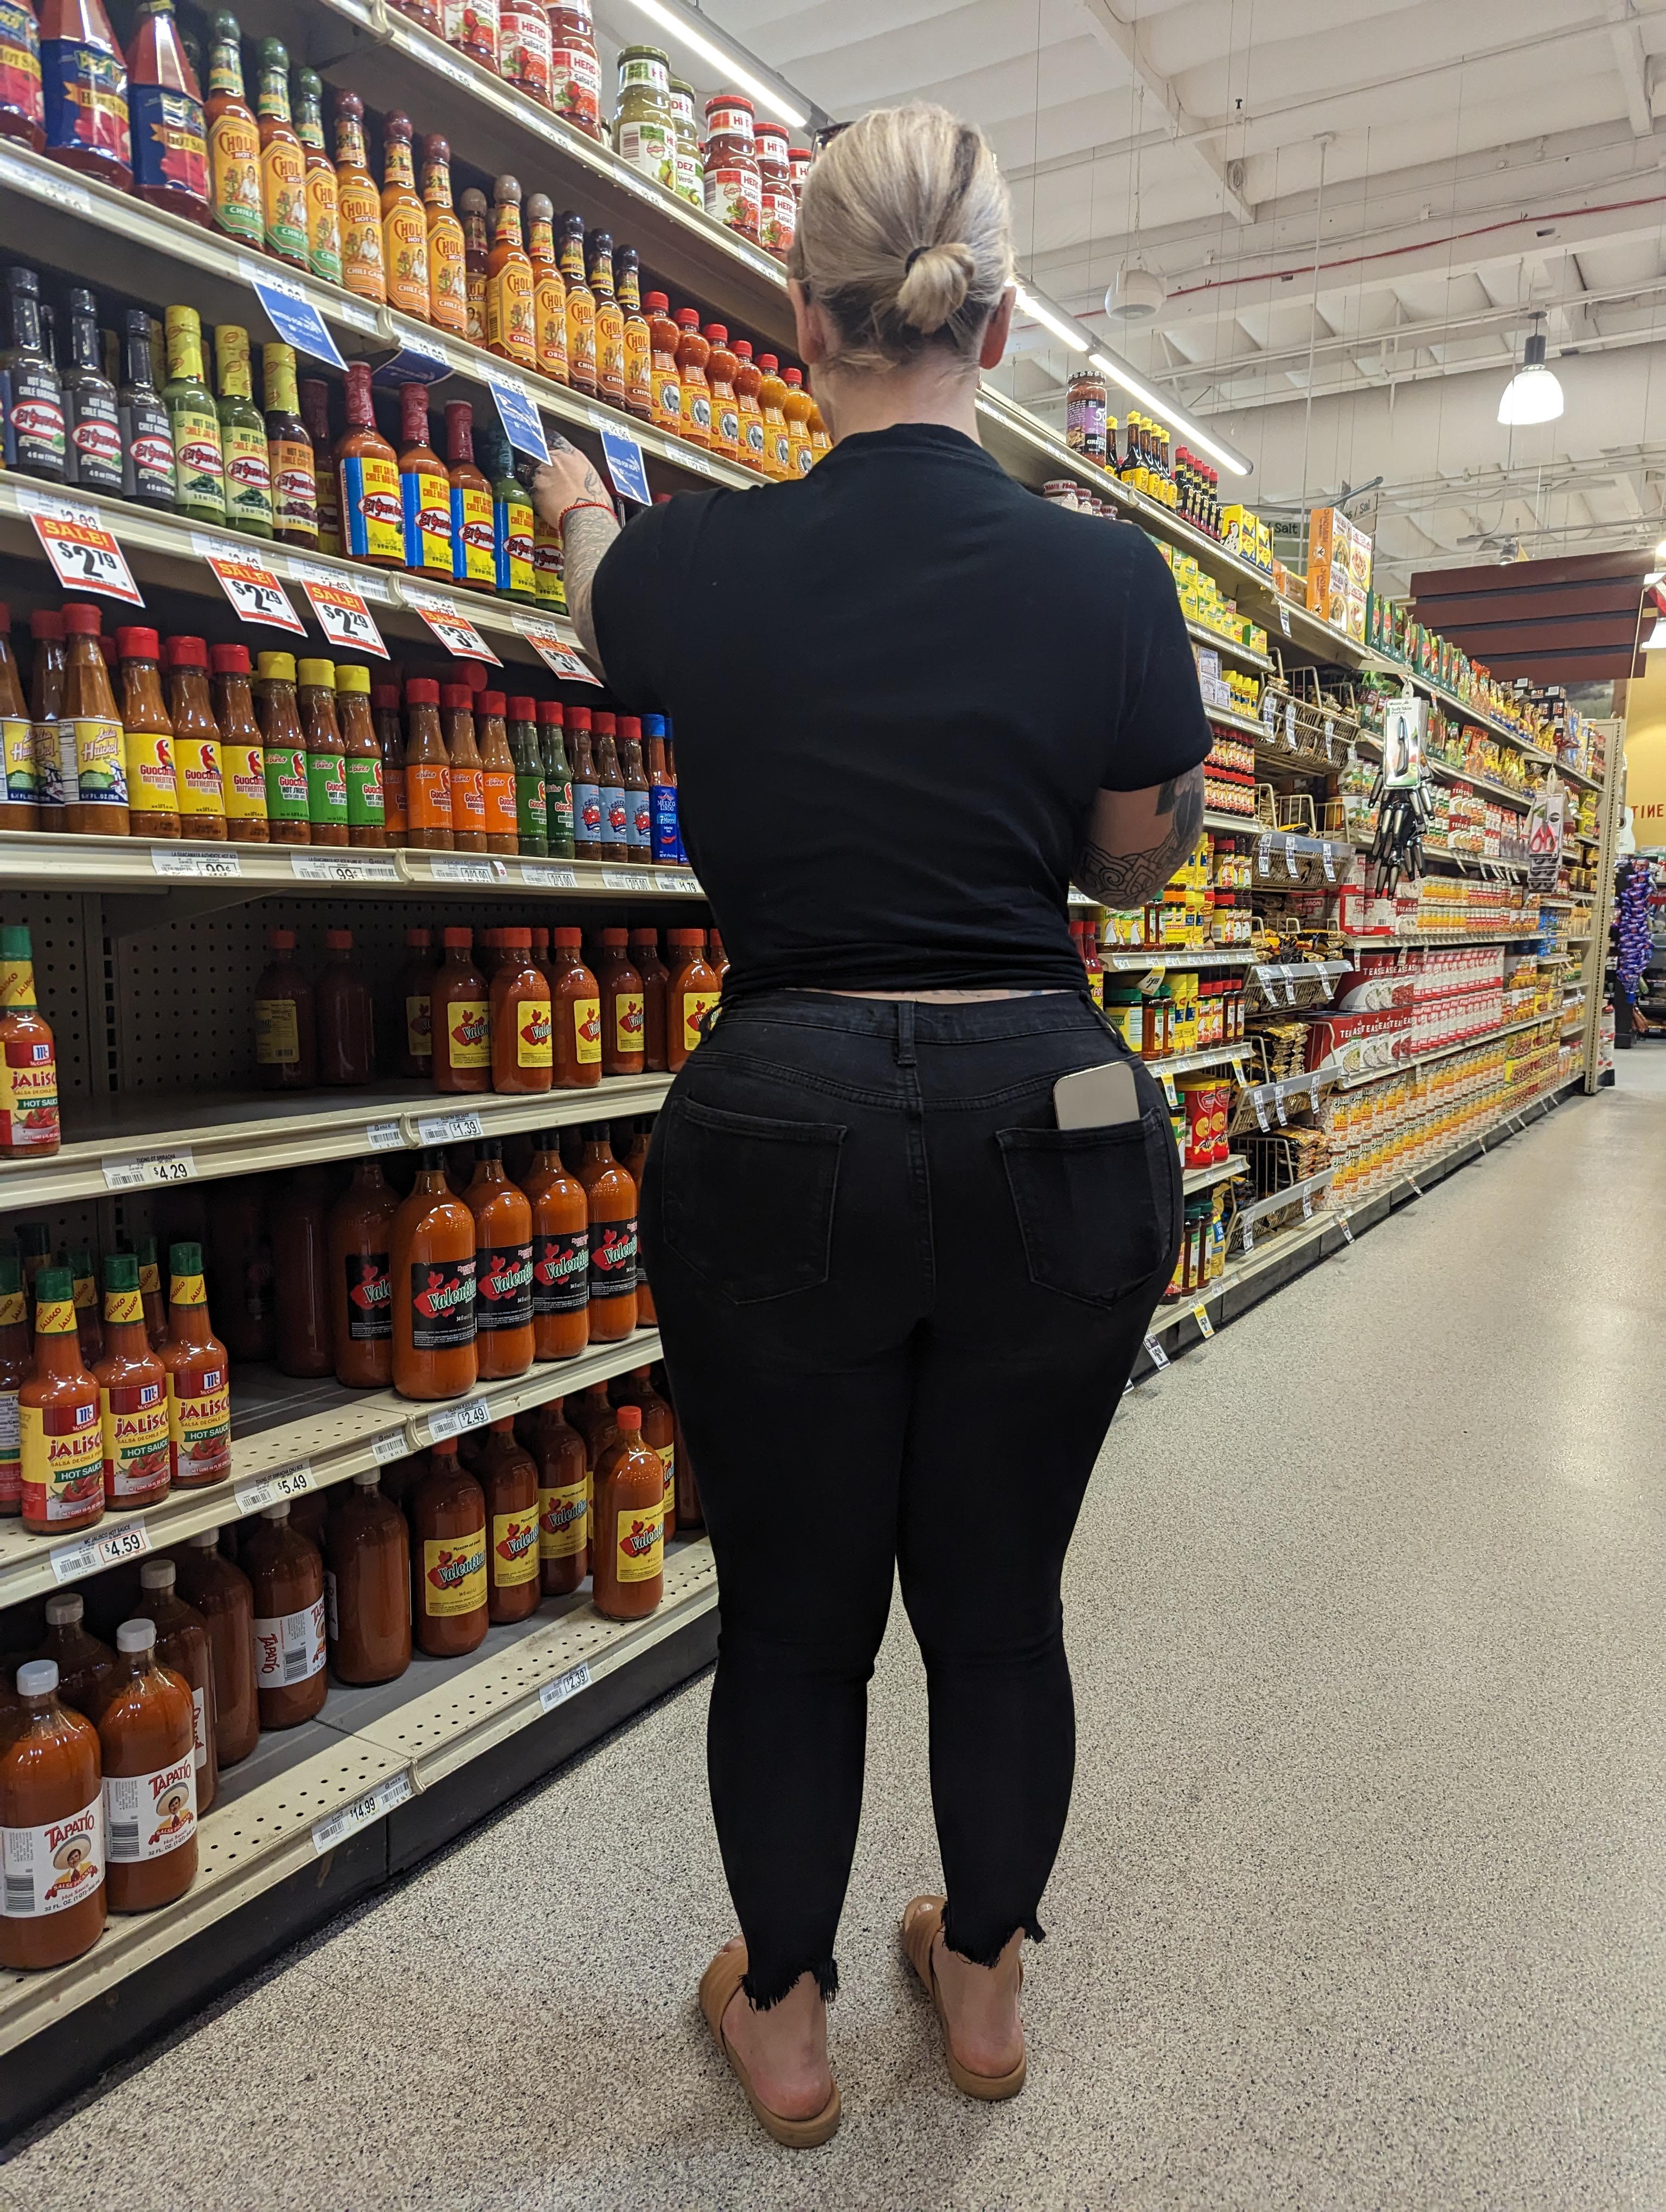 PAWG salsa isnt the only hot stuff in the aisle